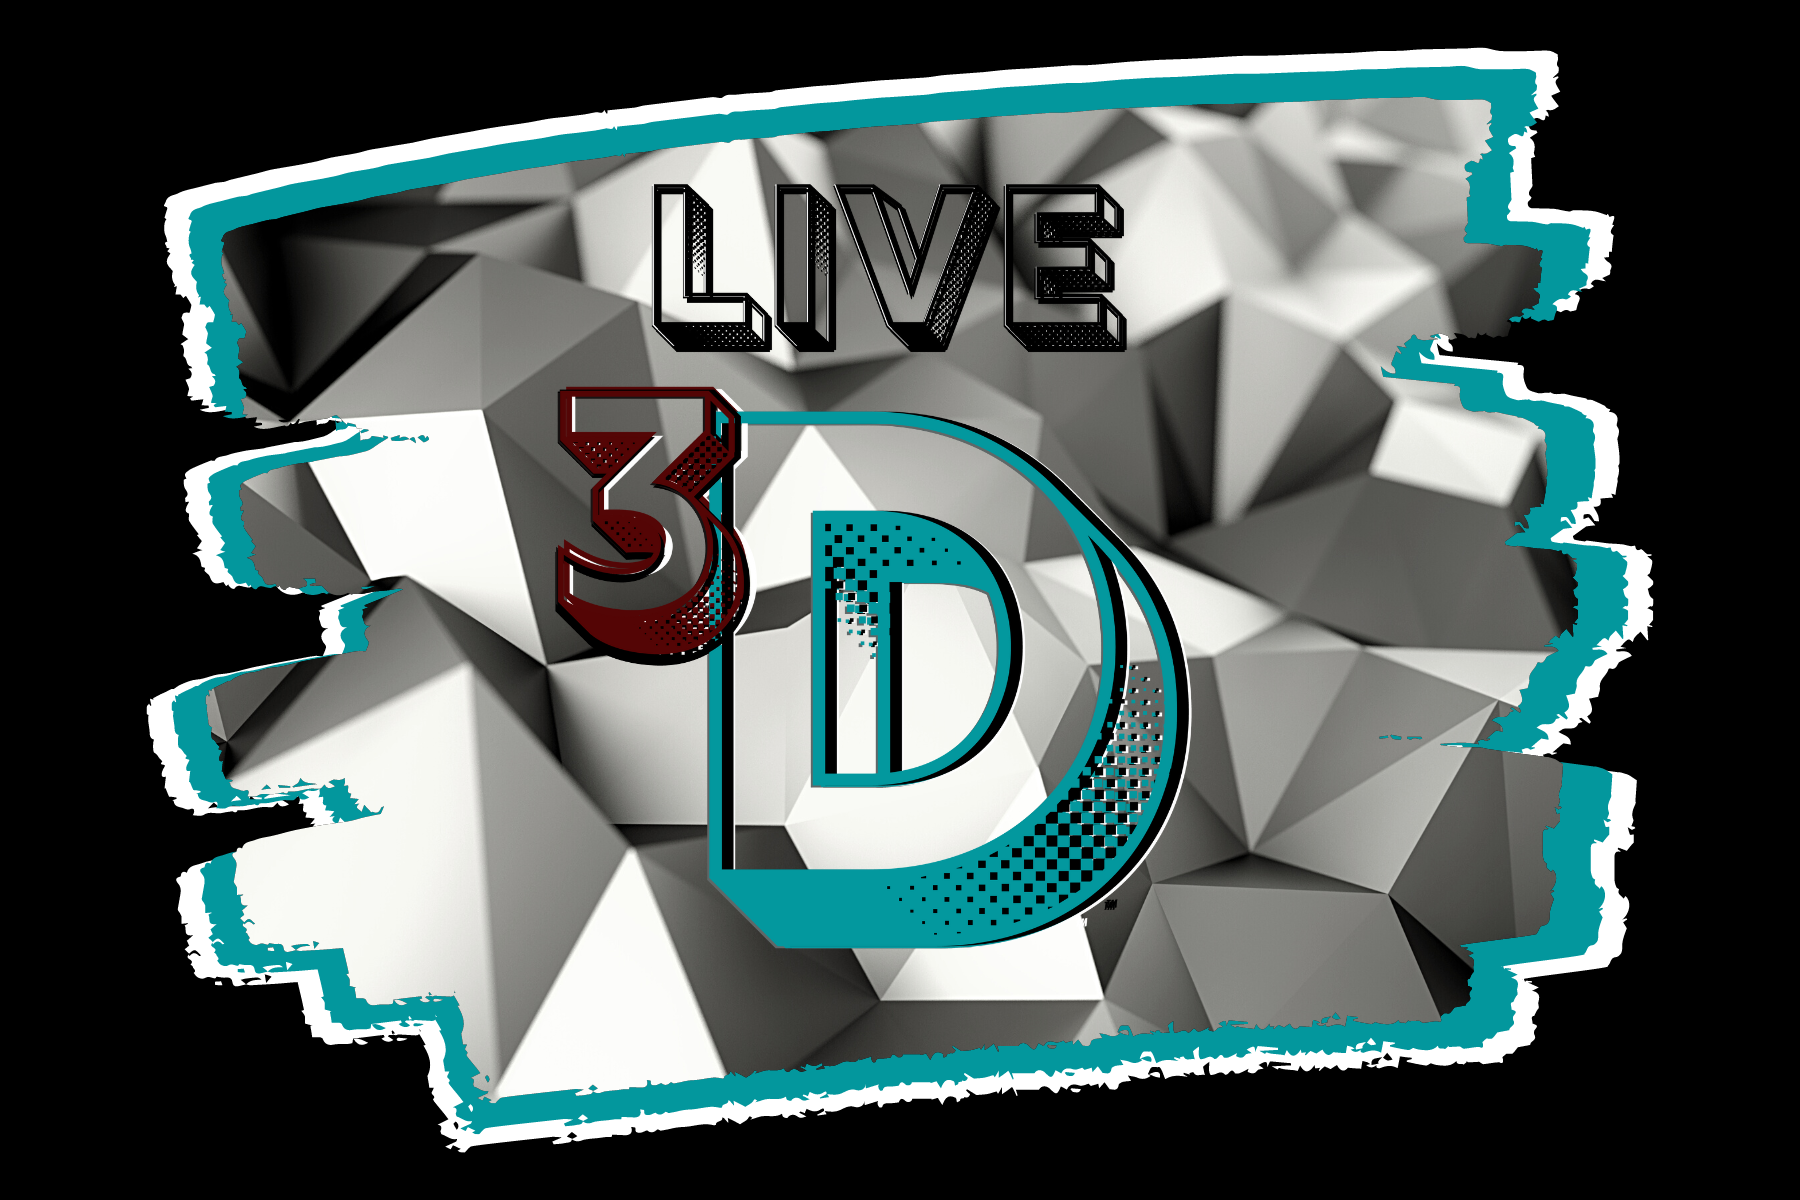 Live 3D Cover Collection